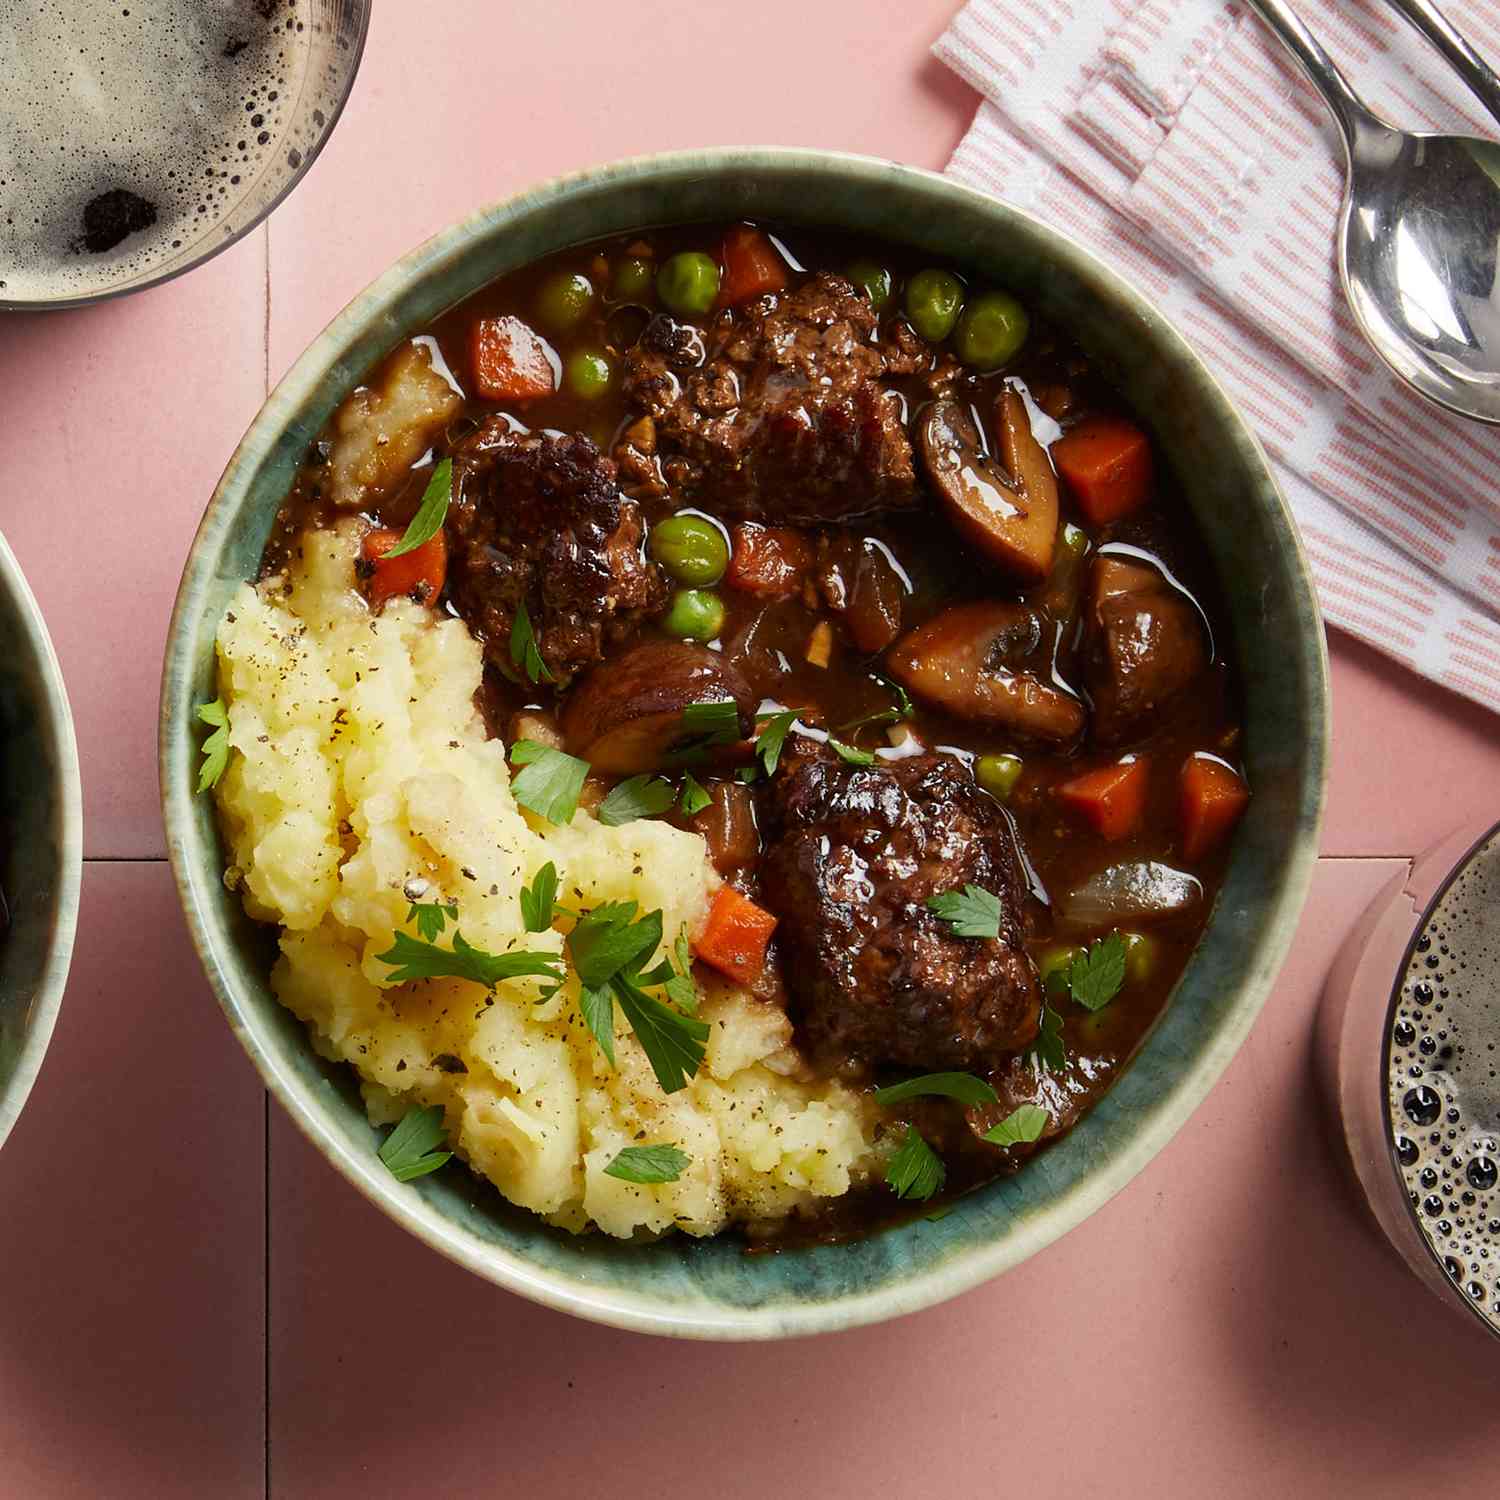 Beef & Mushroom Stew with Mashed Potatoes